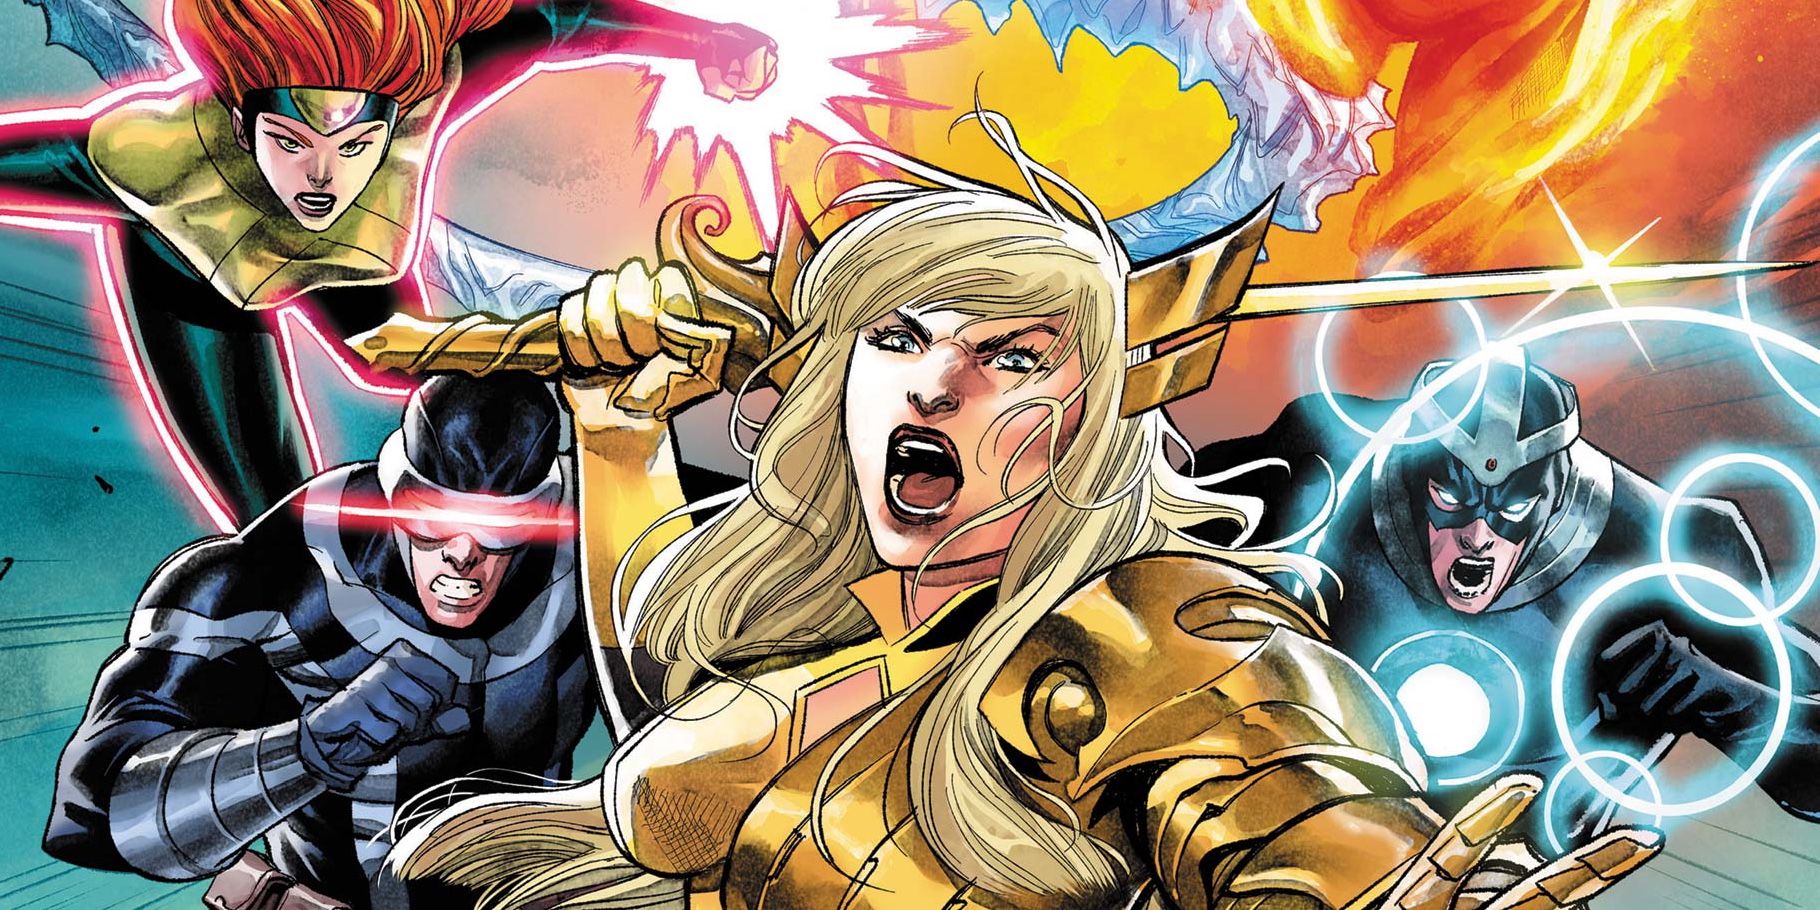 X-Men #17 Cover with Magik at the lead